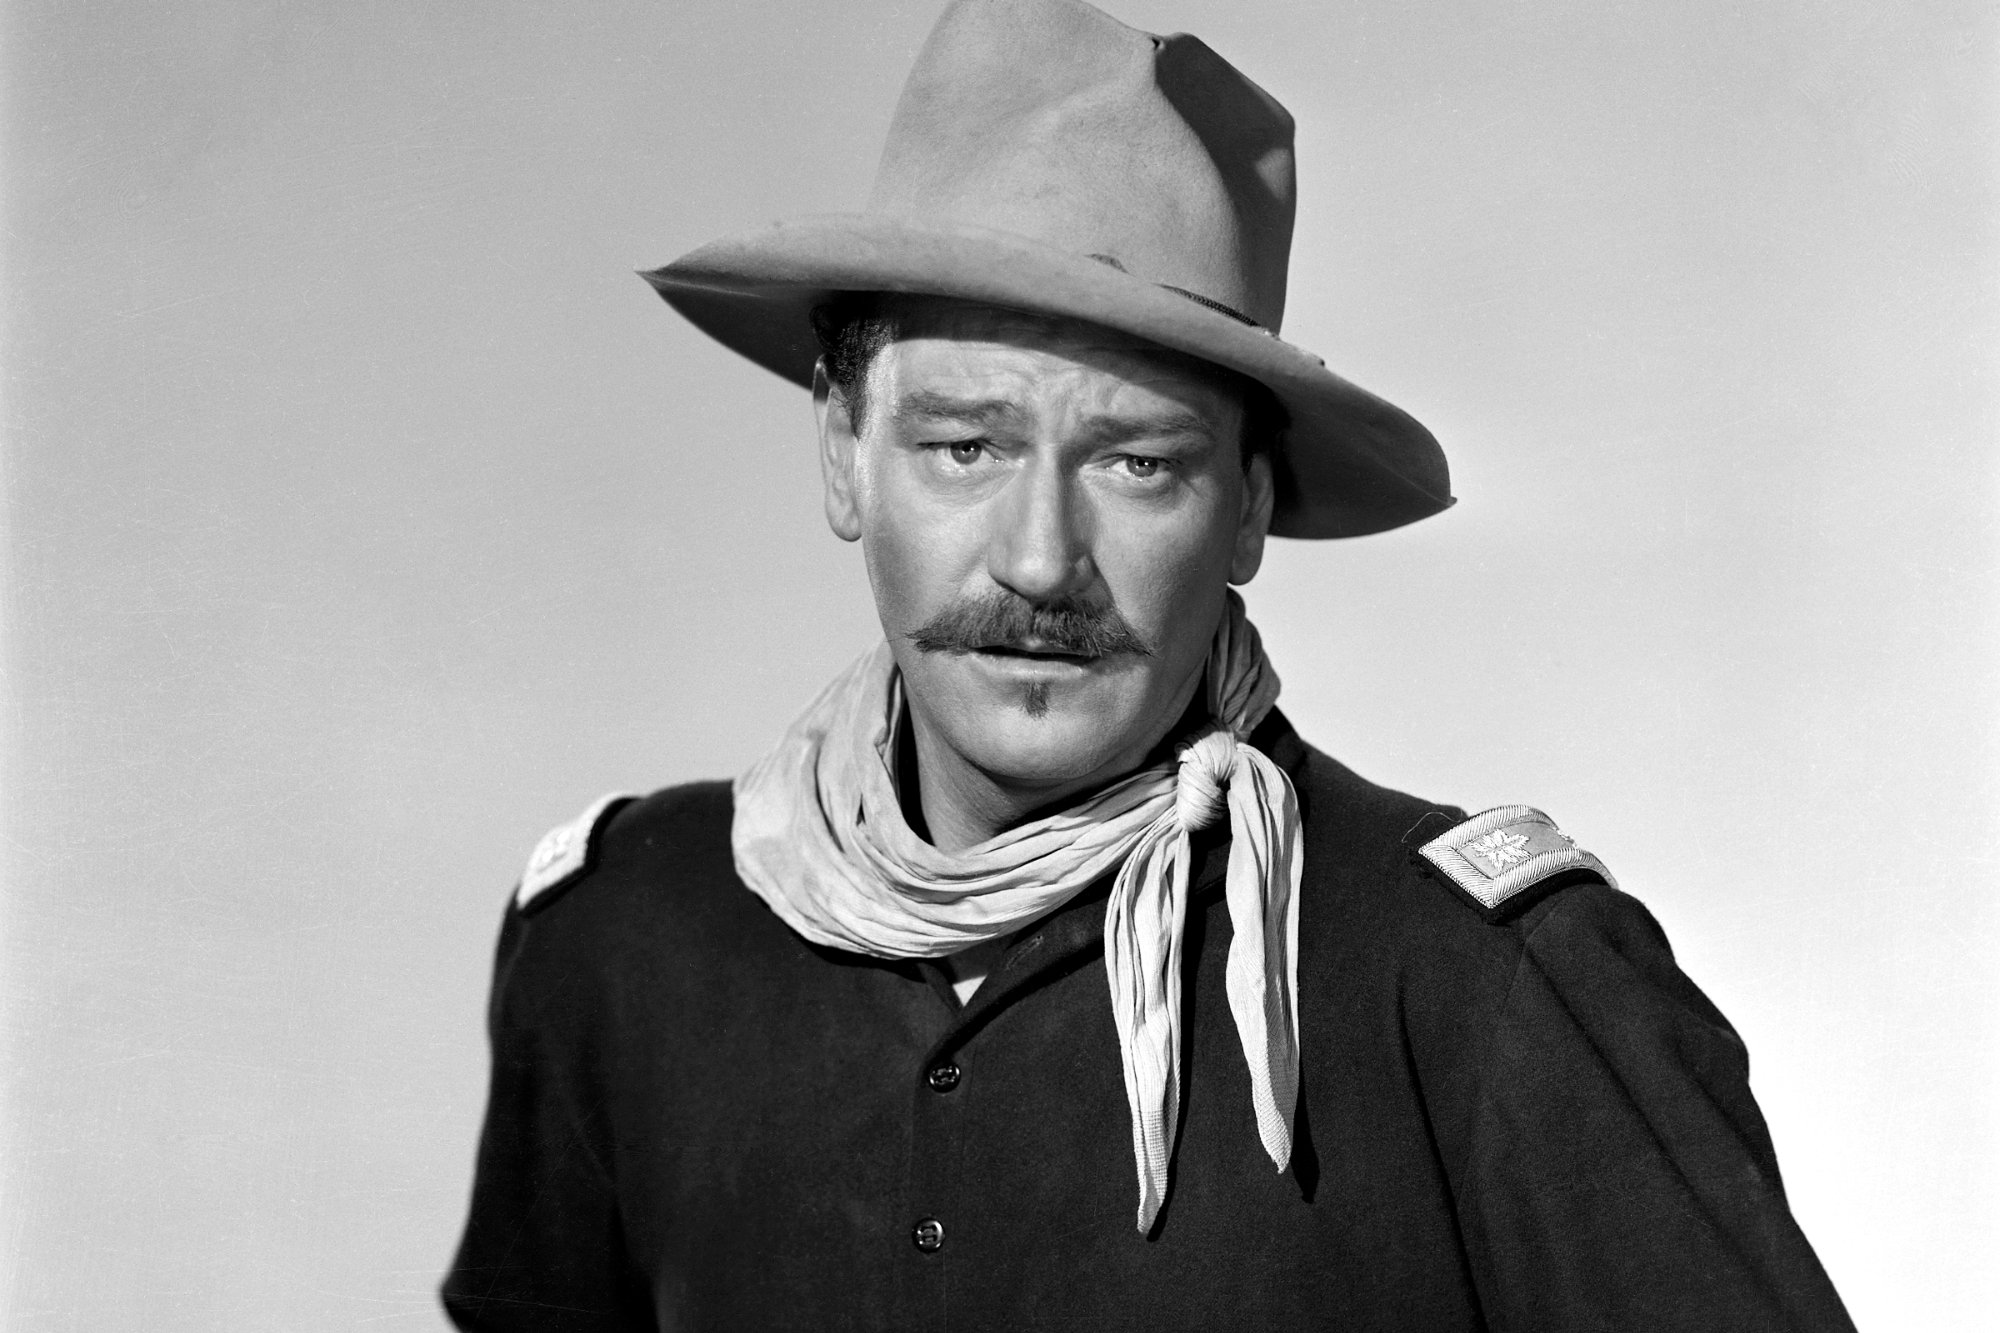 'Rio Grande' John Wayne as Lt. Col. Kirby Yorke with a mustache and wearing a Western hat and costume